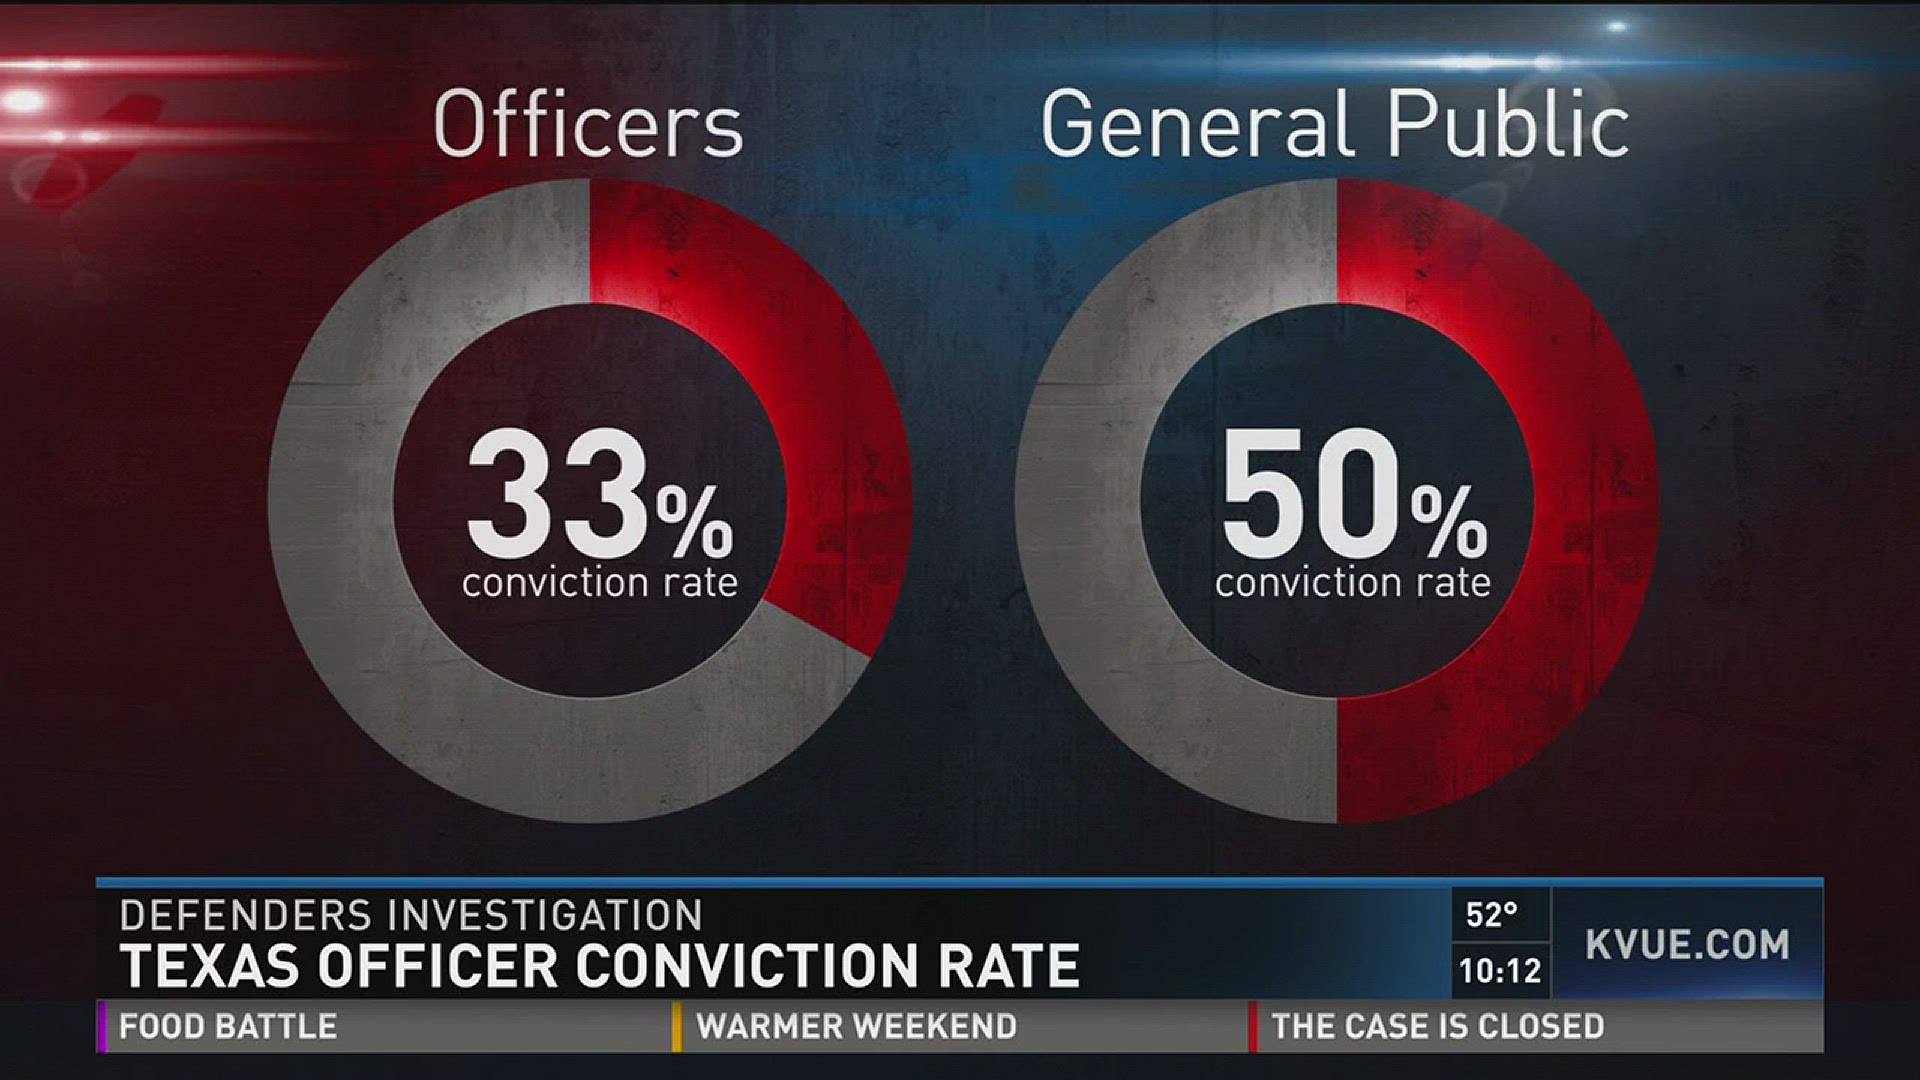 Texas officer conviction rate